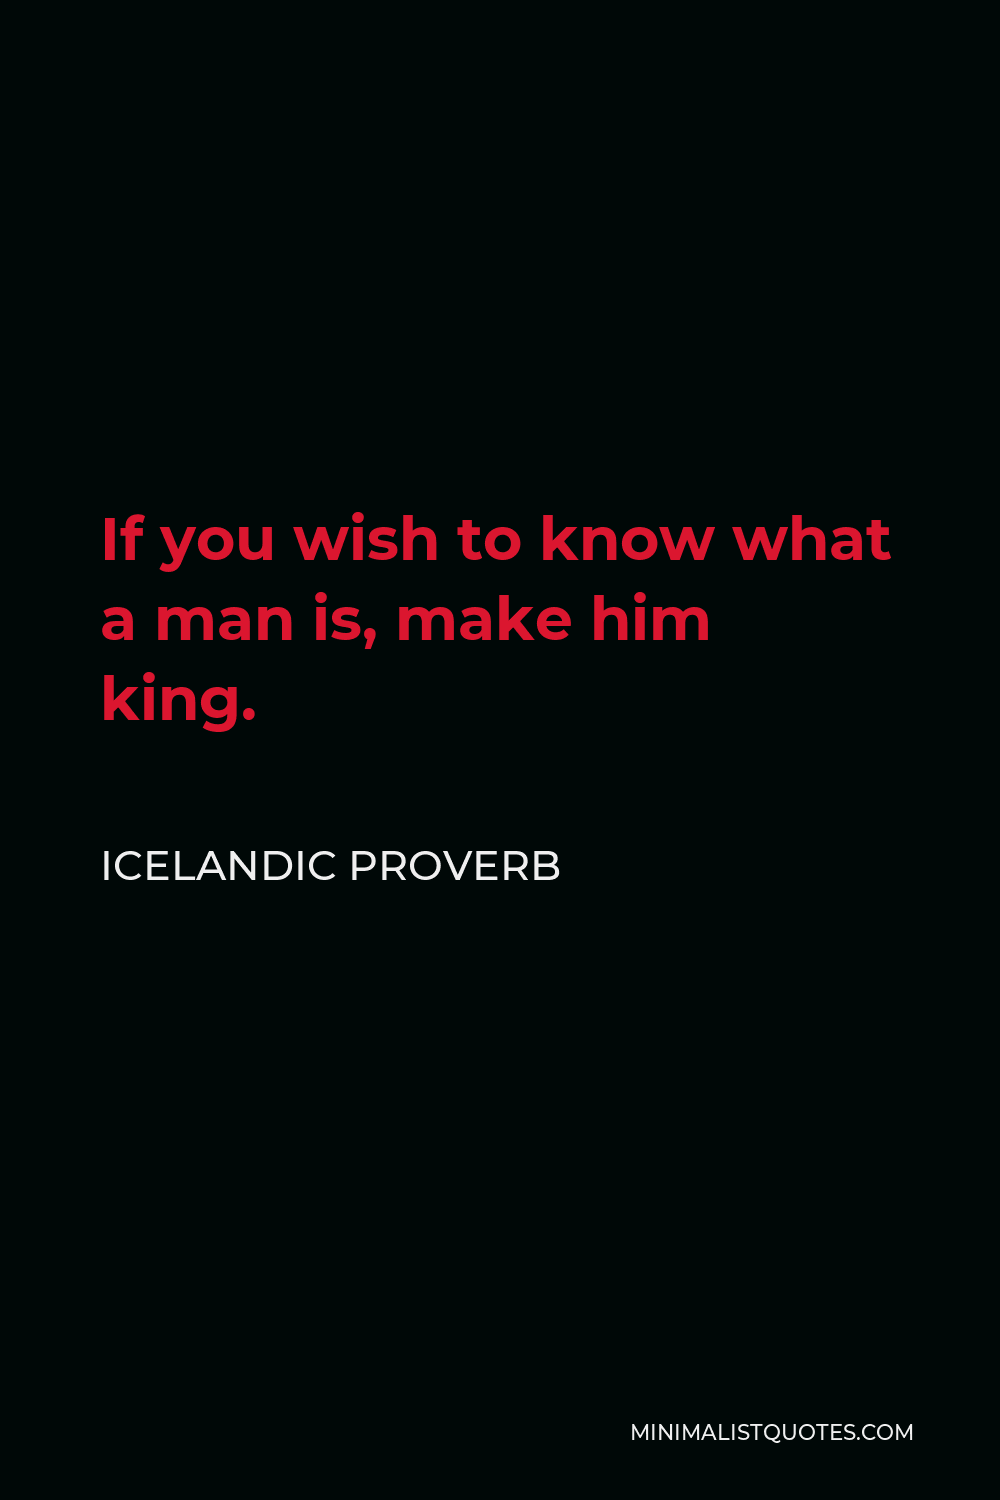 Icelandic Proverb Quote - If you wish to know what a man is, make him king.